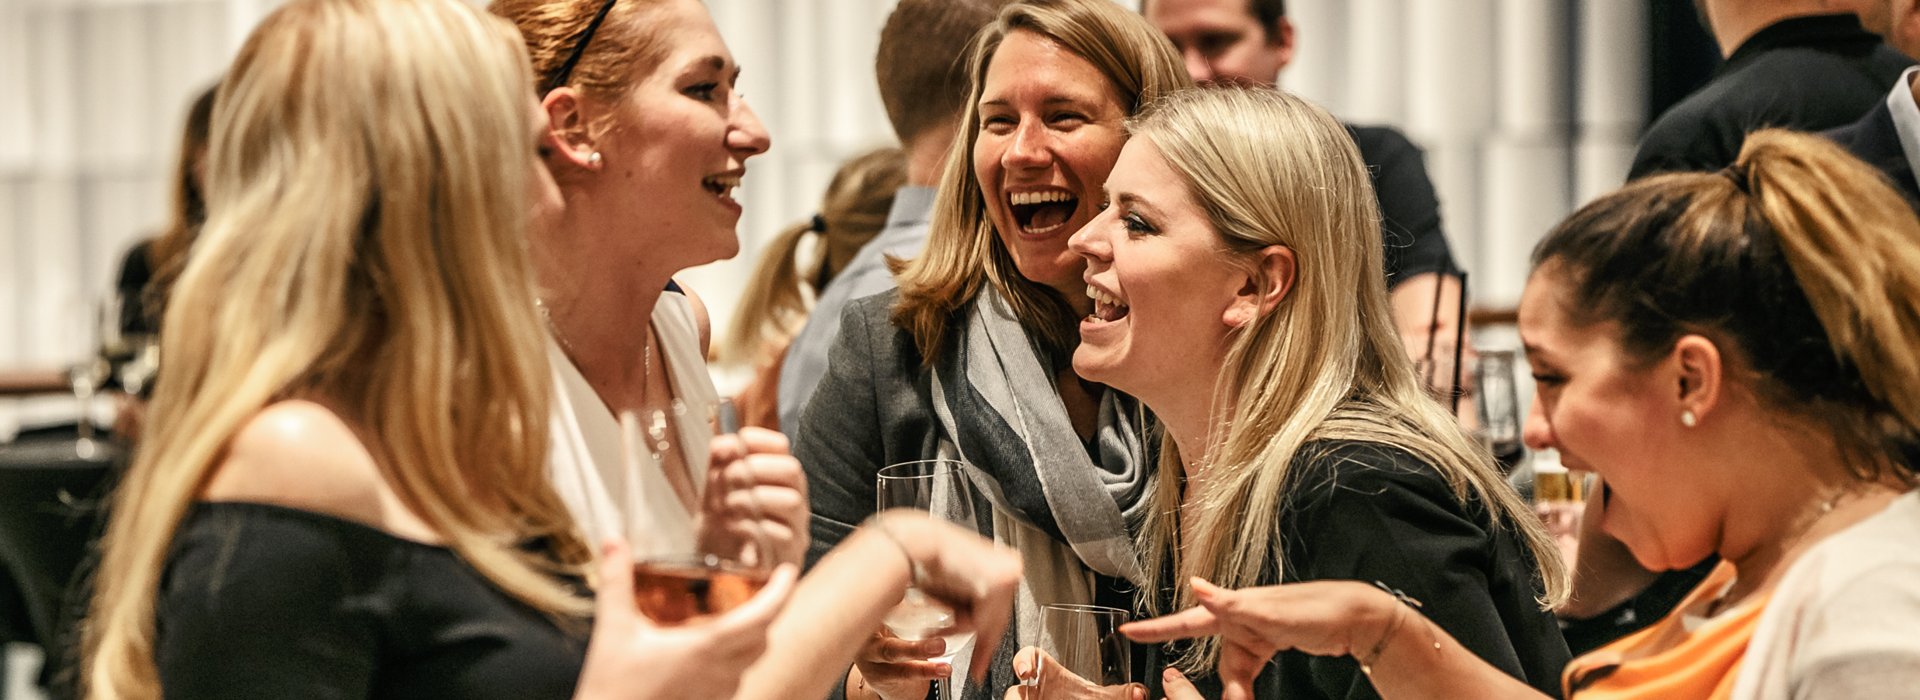 networking_event_women_chatting_laughing.jpg